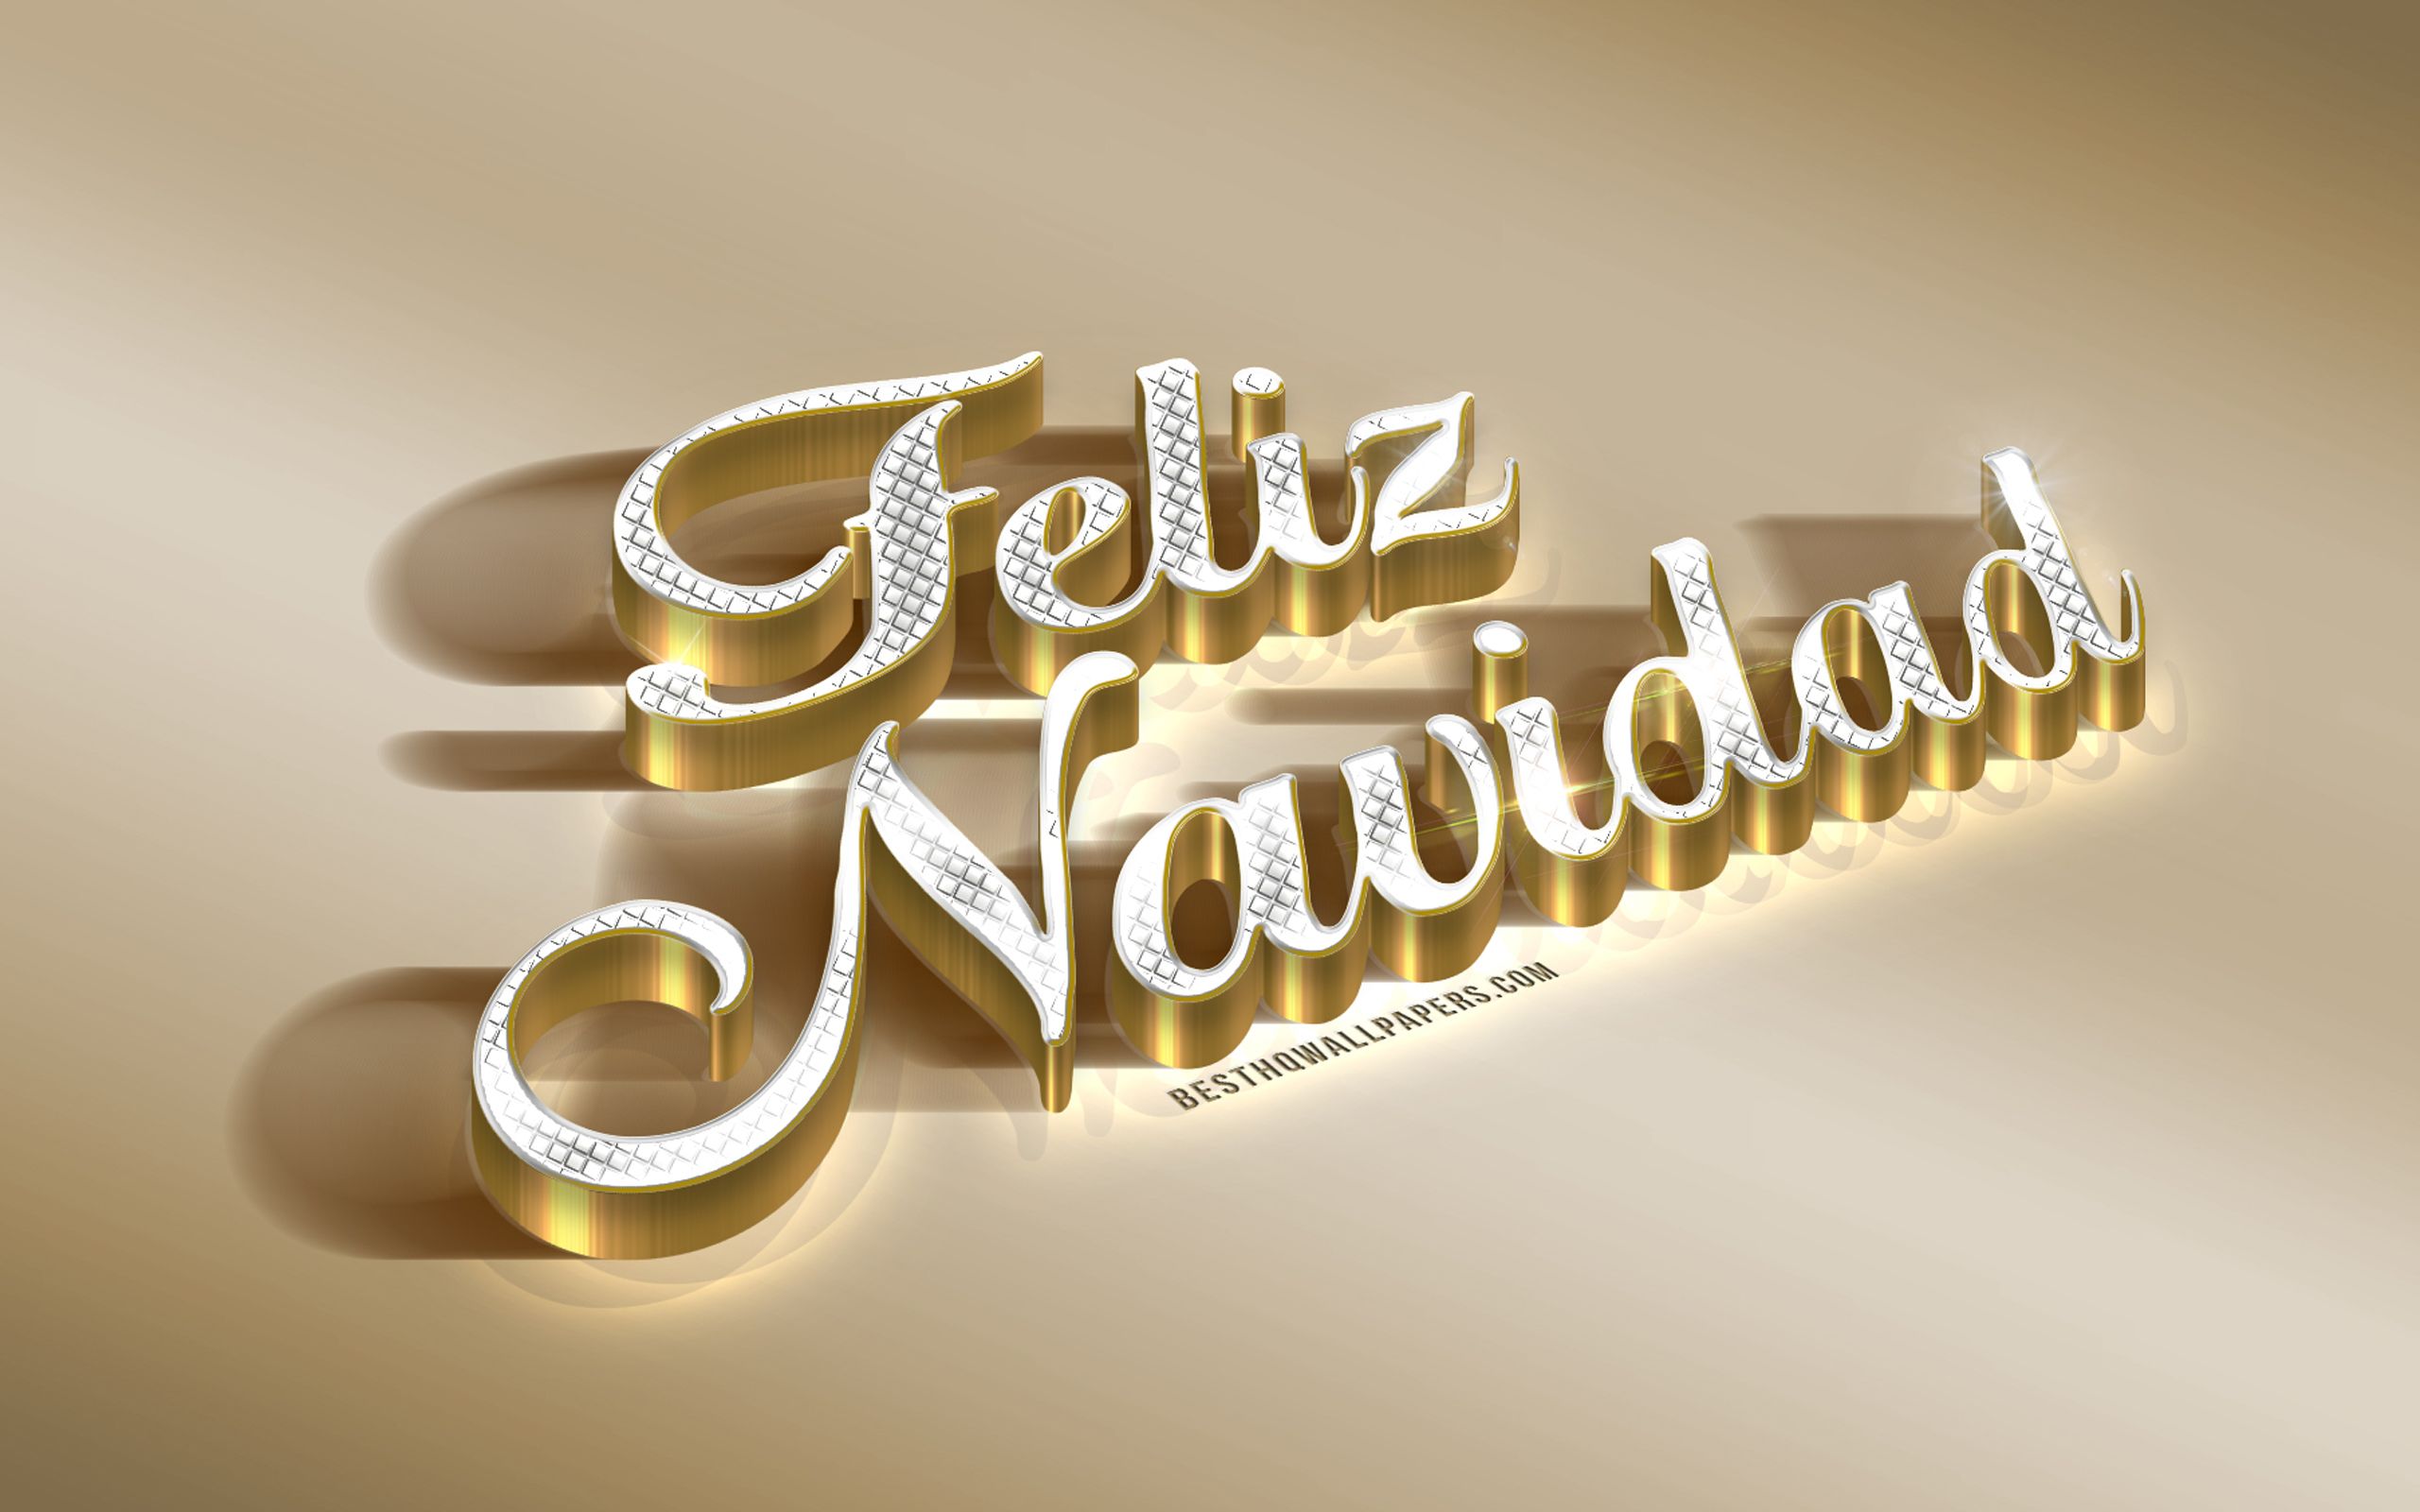 Download wallpaper Feliz Navidad, golden 3D art, Merry Christmas in Spanish, gold background, gold metallic letters, Christmas golden background, Spain for desktop with resolution 2560x1600. High Quality HD picture wallpaper